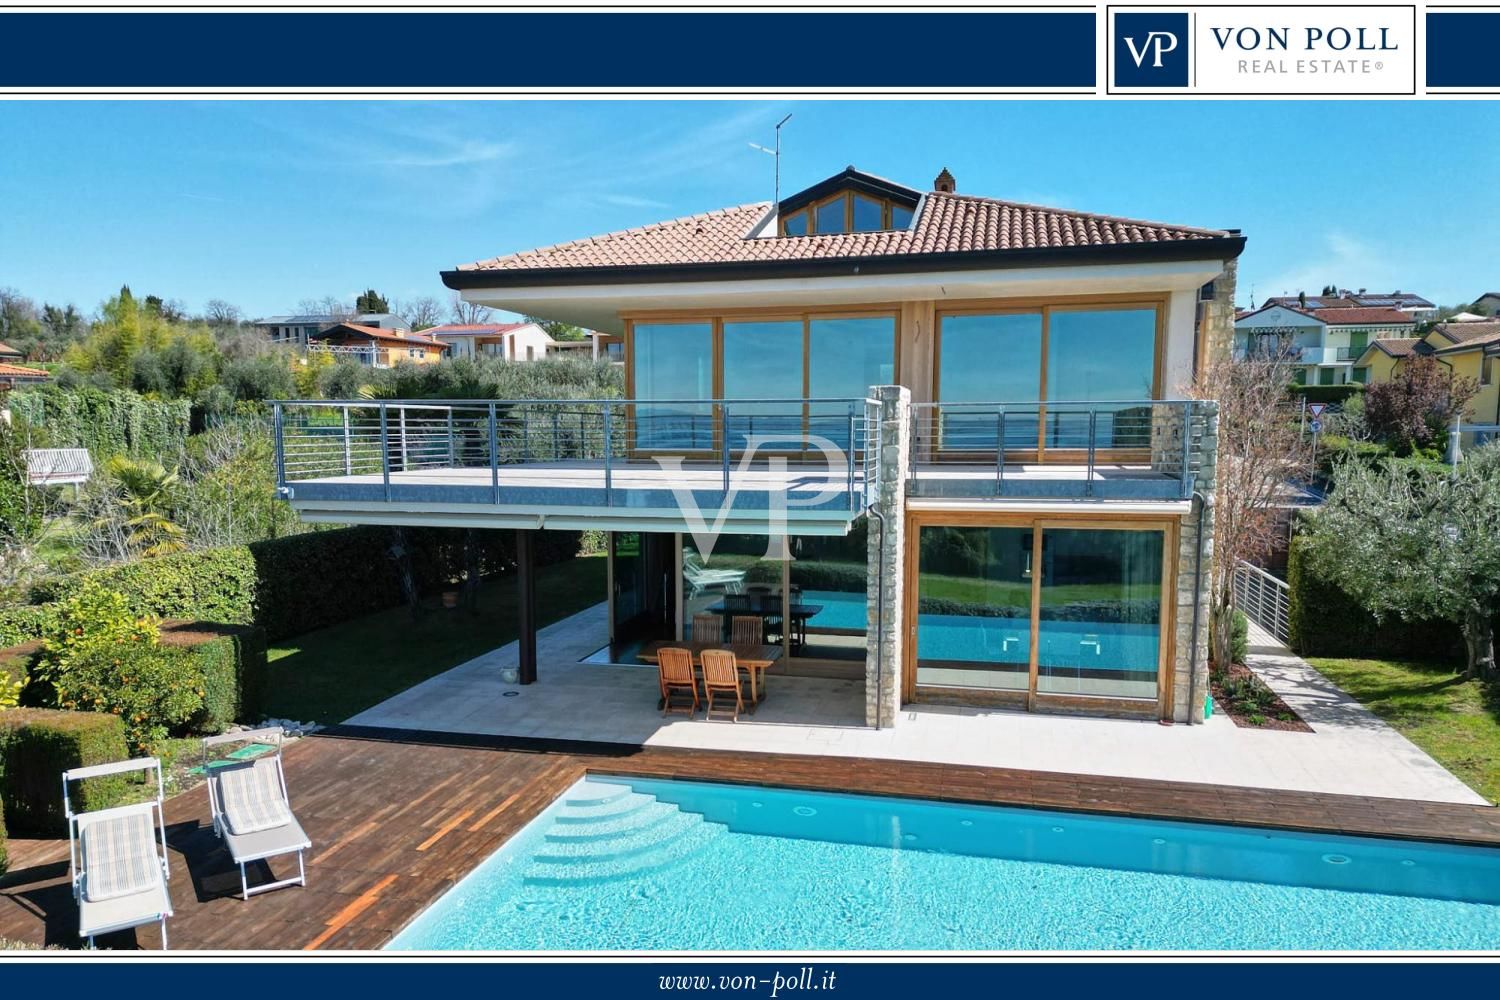 Remarkable Villa with fantastic Lake View near the historic center